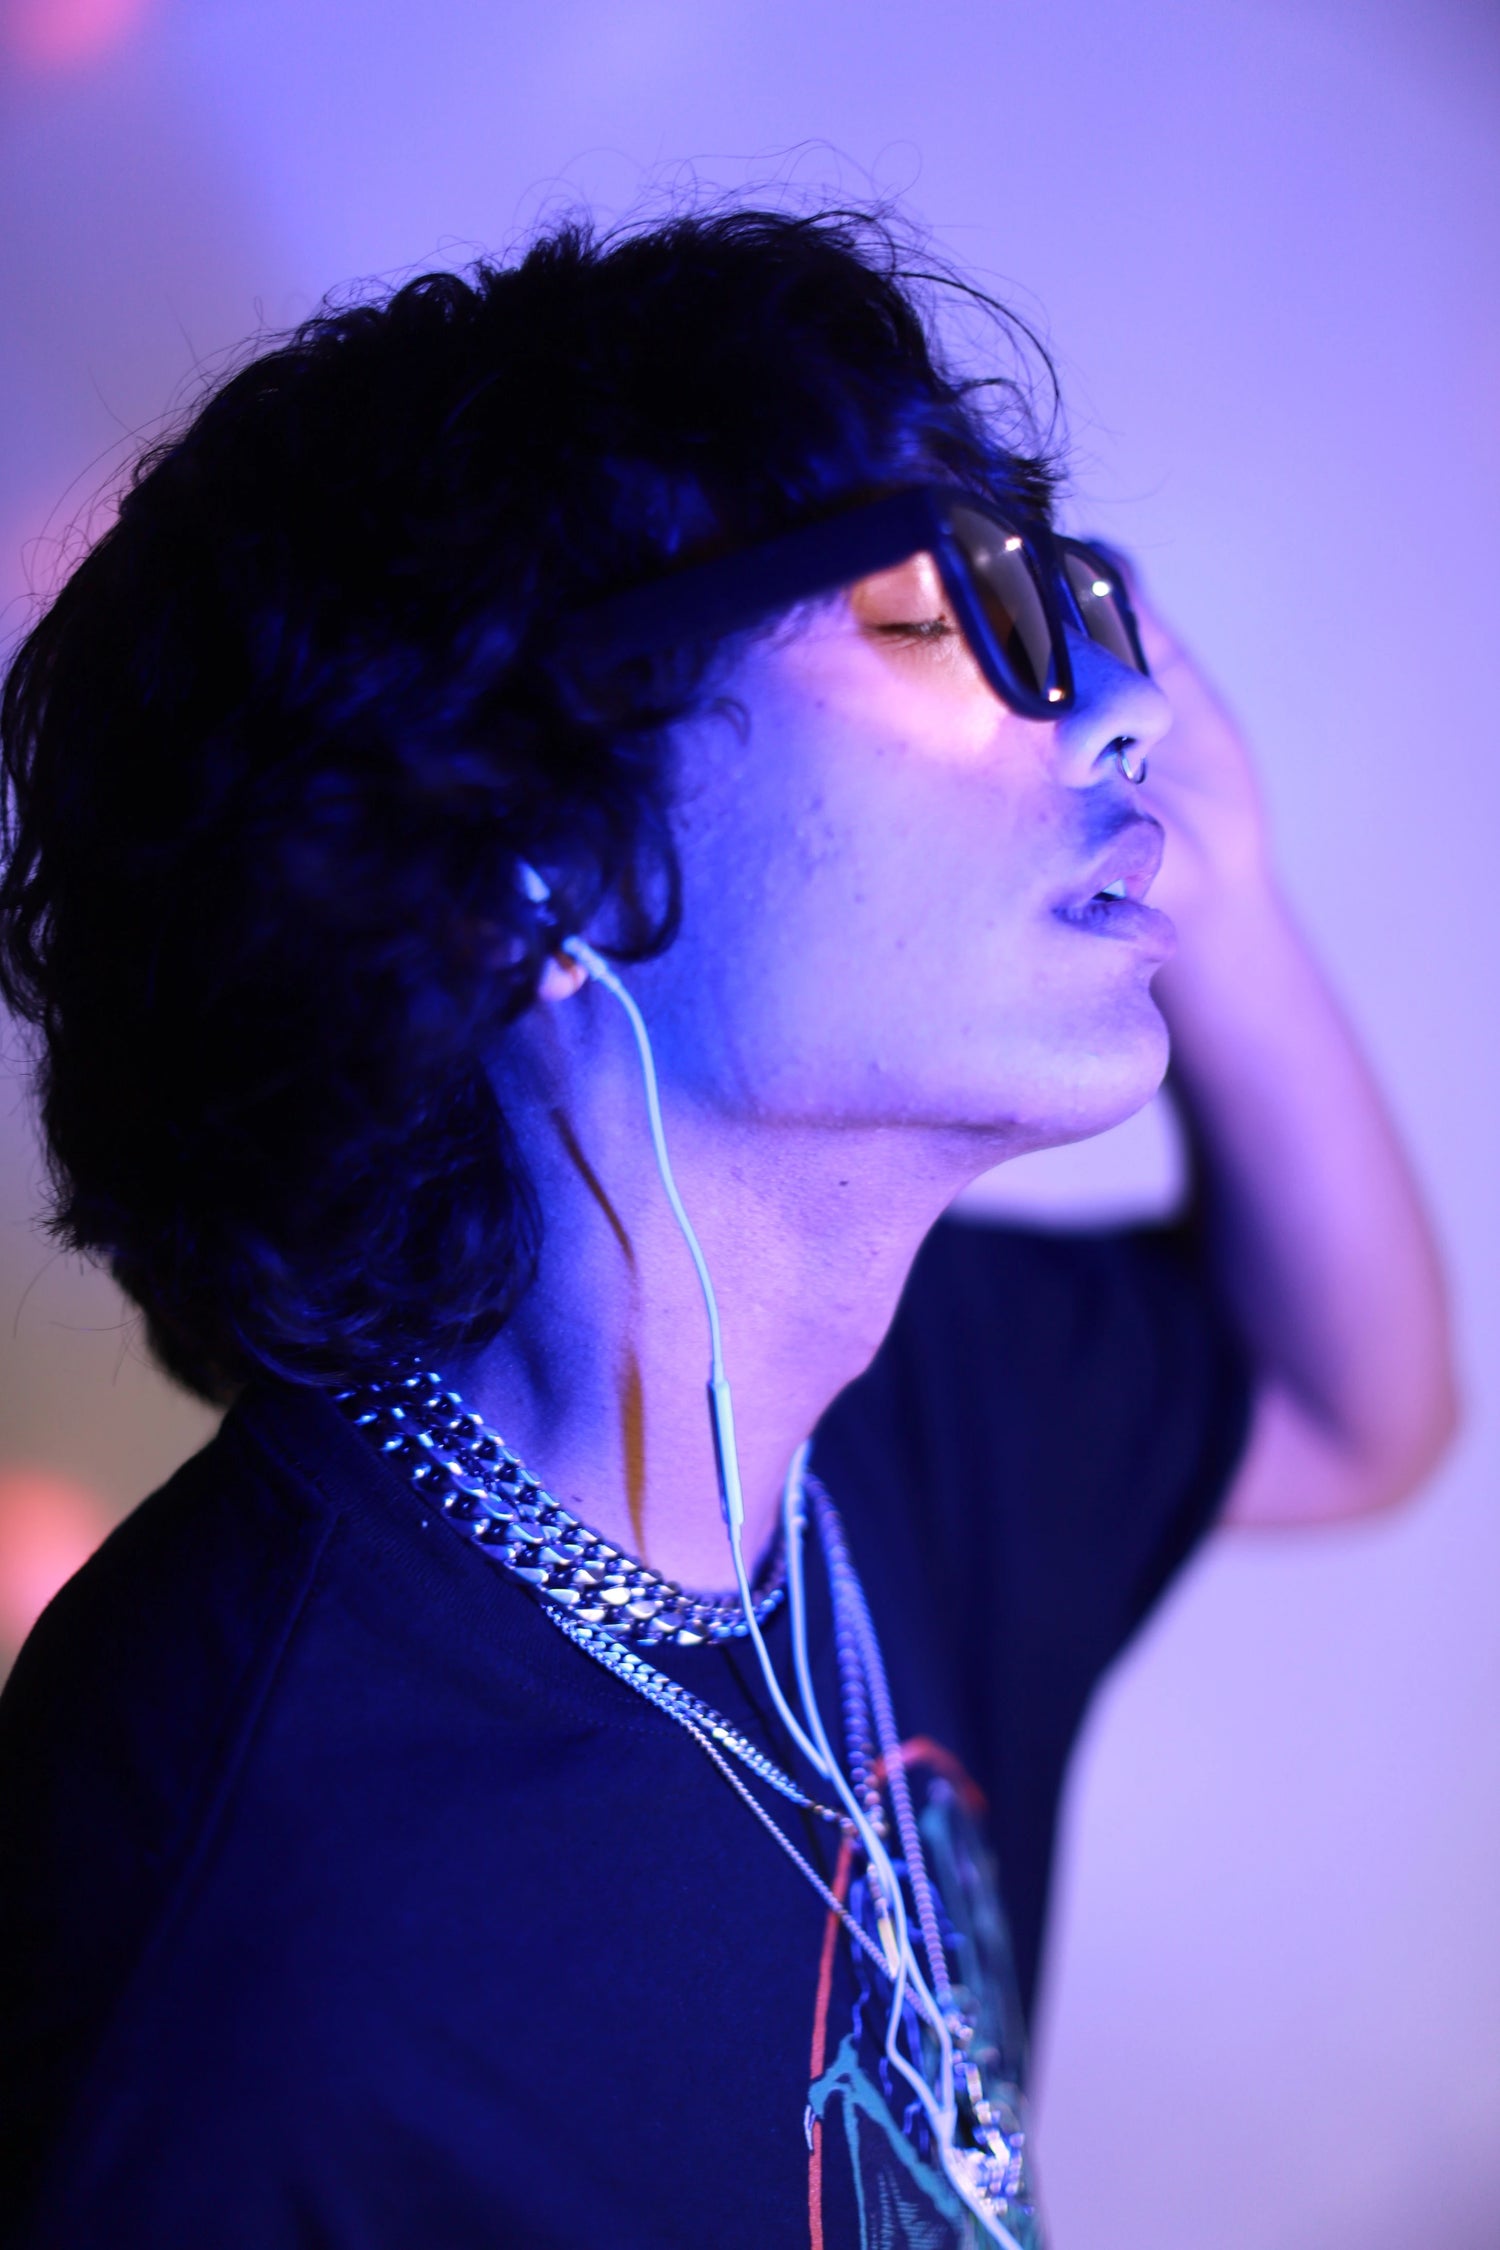 Male wearing Healyan's Glasses paired with wired headphones in purple light